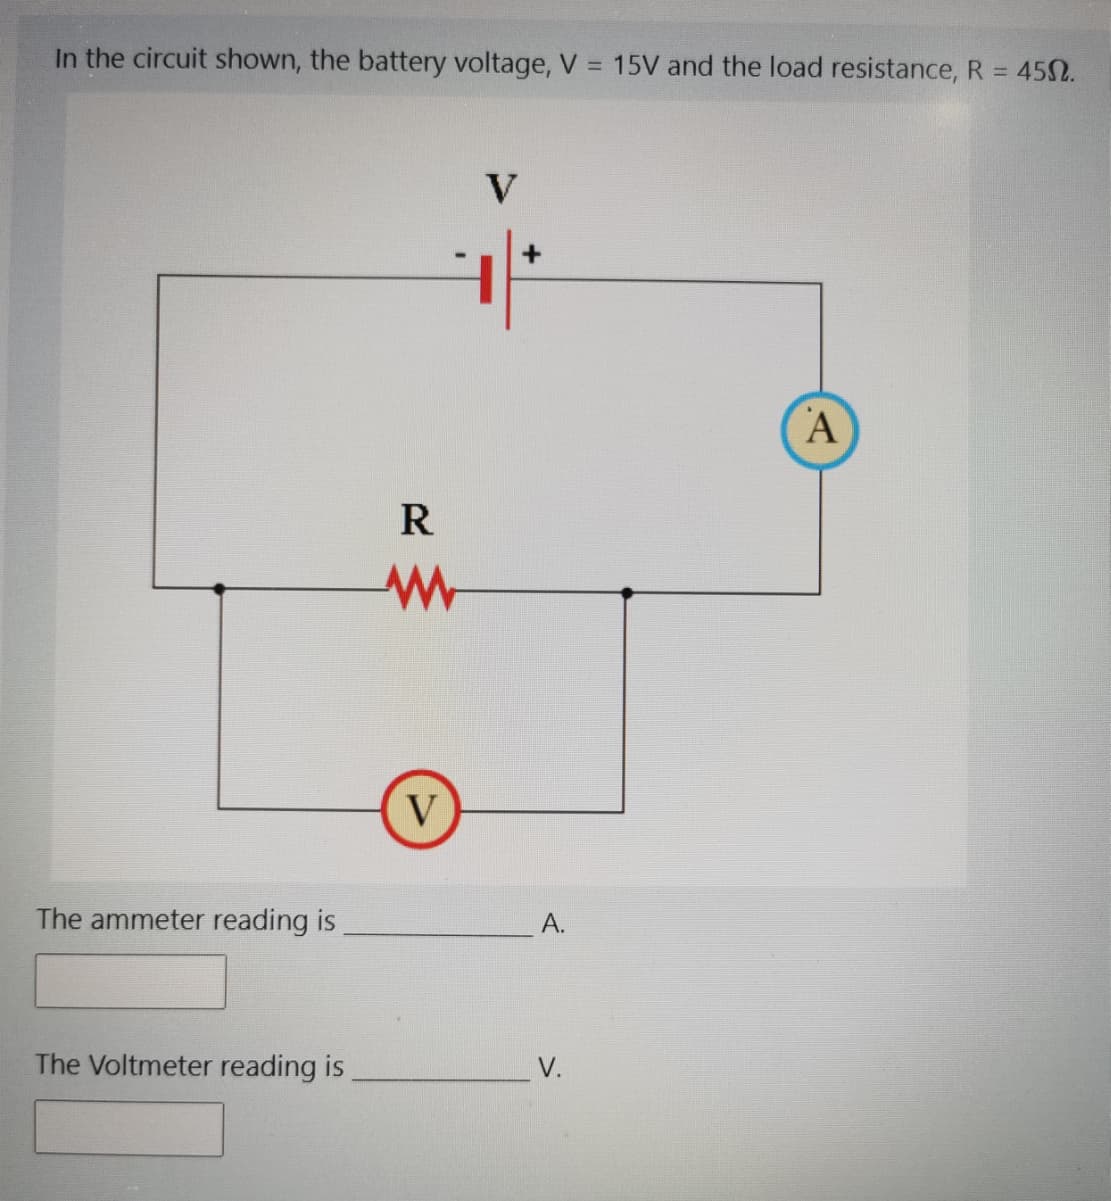 In the circuit shown, the battery voltage, V = 15V and the load resistance, R = 452.
%3D
V
A
R
V
The ammeter reading is
A.
The Voltmeter reading is
V.
